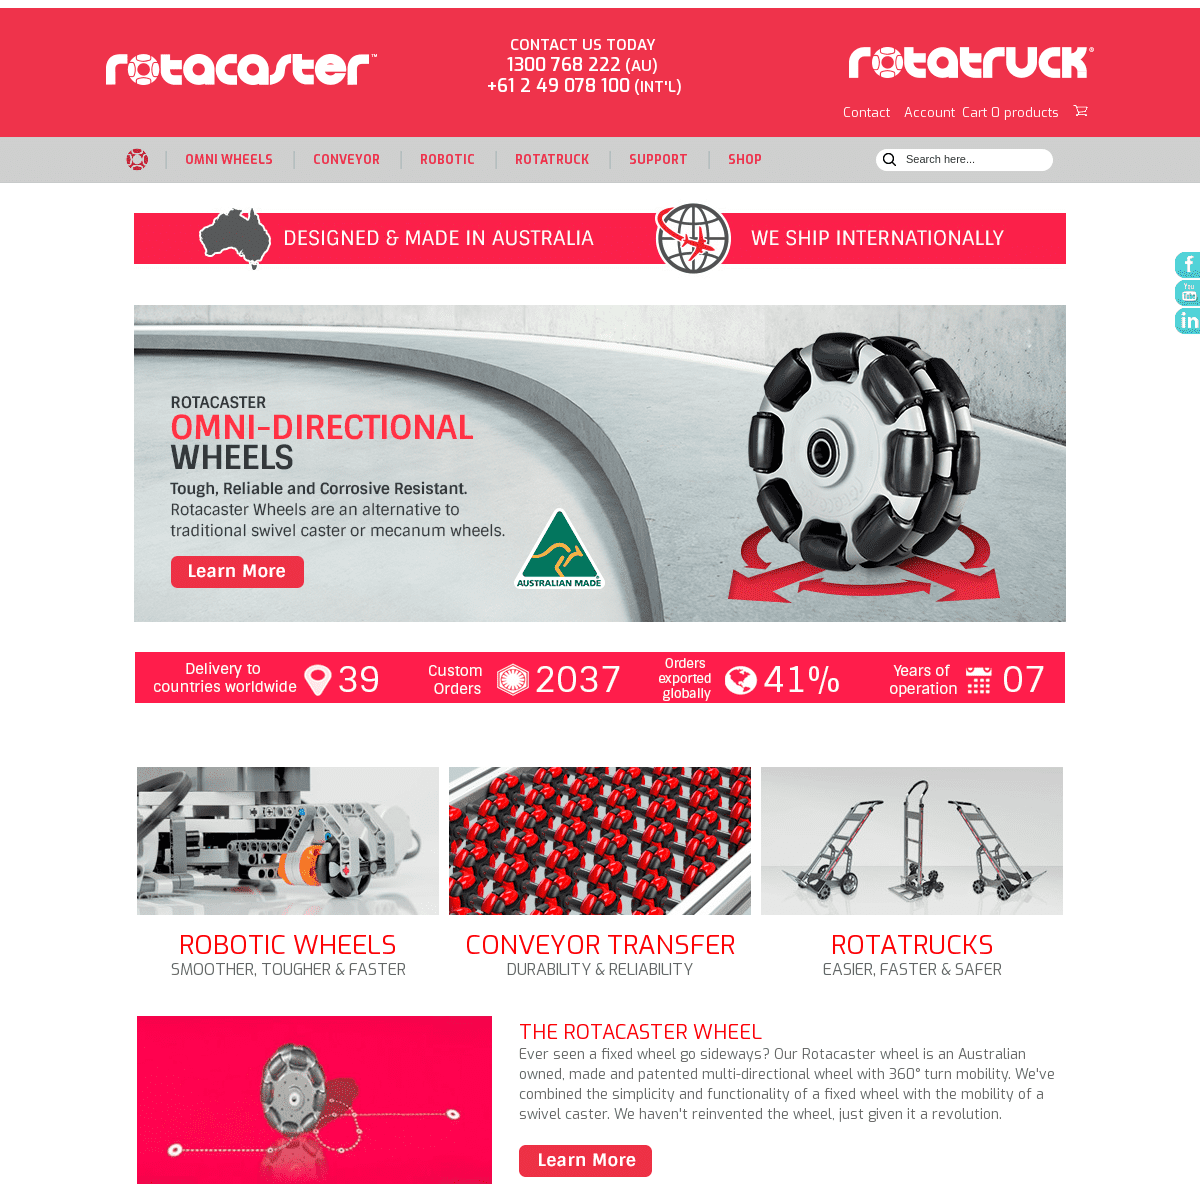 Multi Directional and Omni Wheels - Rotacaster - The Wheel 2.0